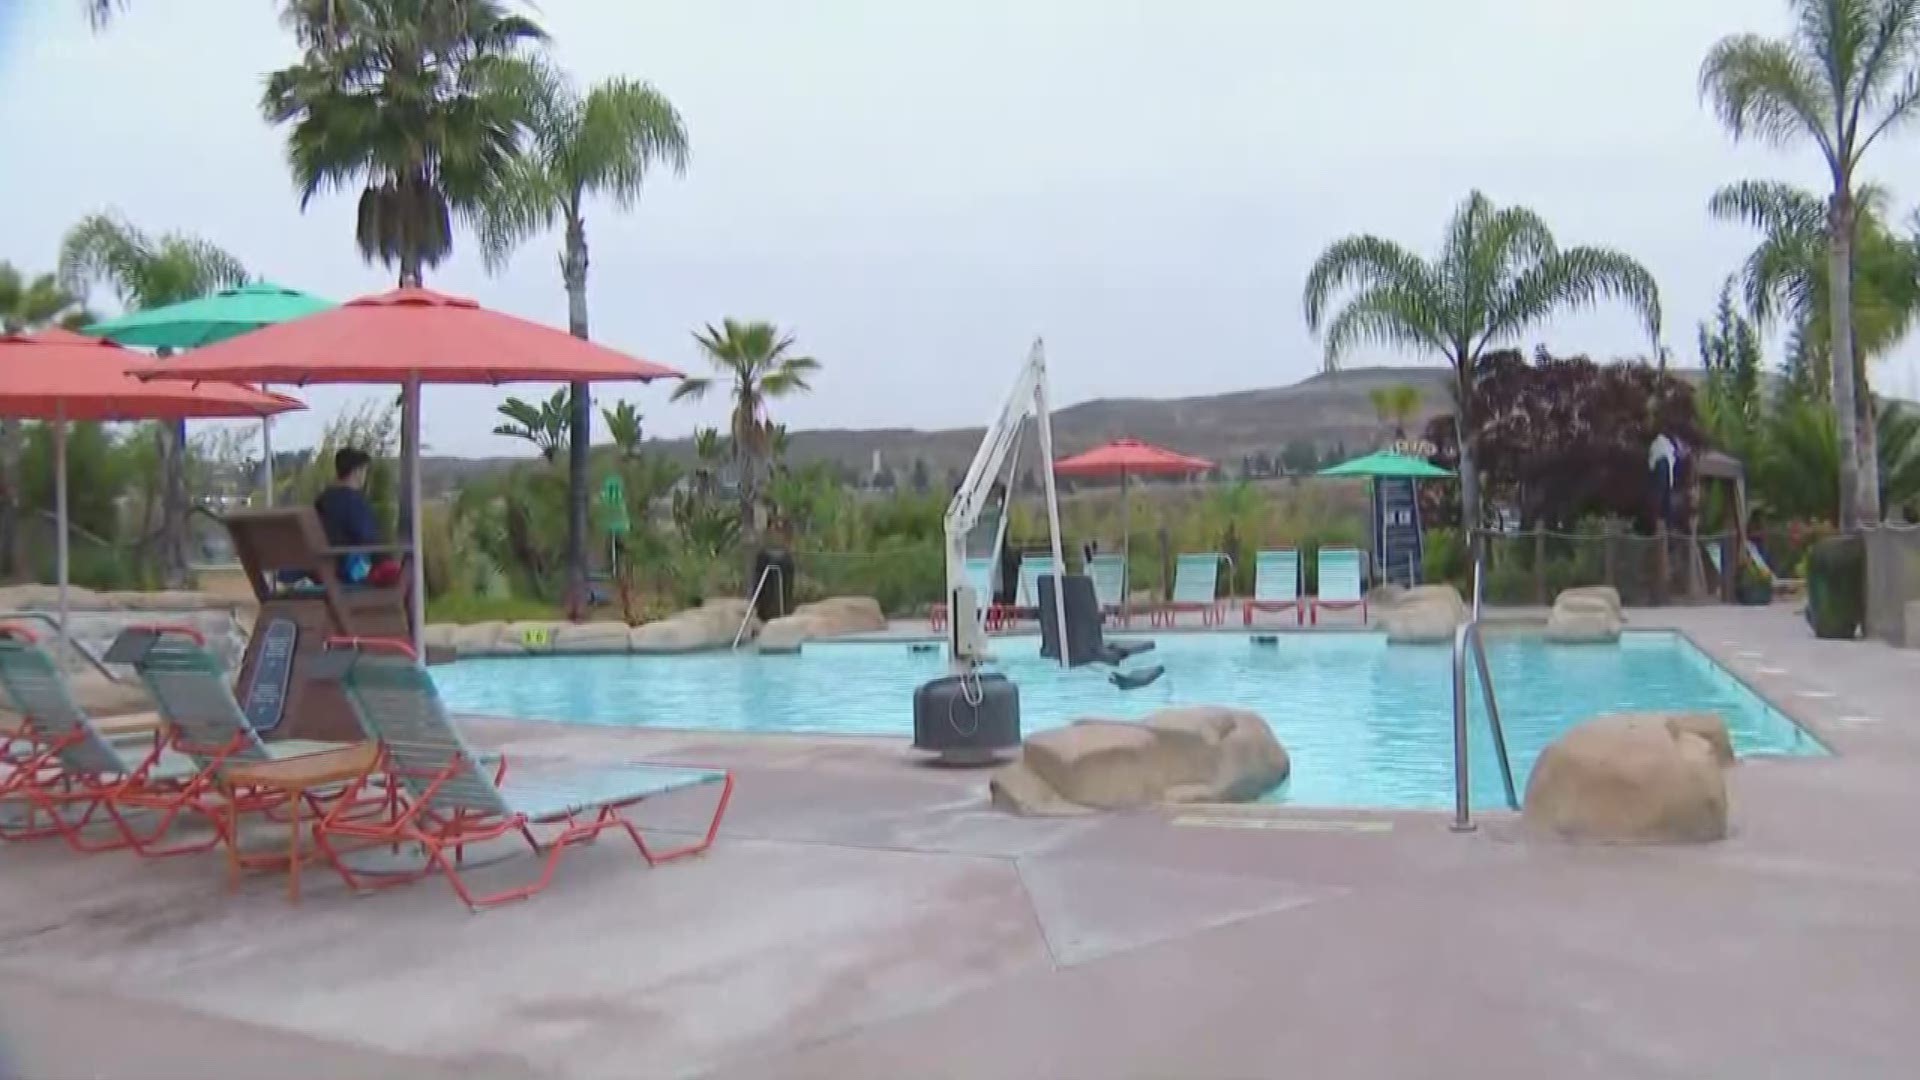 Ashley shows you some private heated pools and some food that you can order poolside.